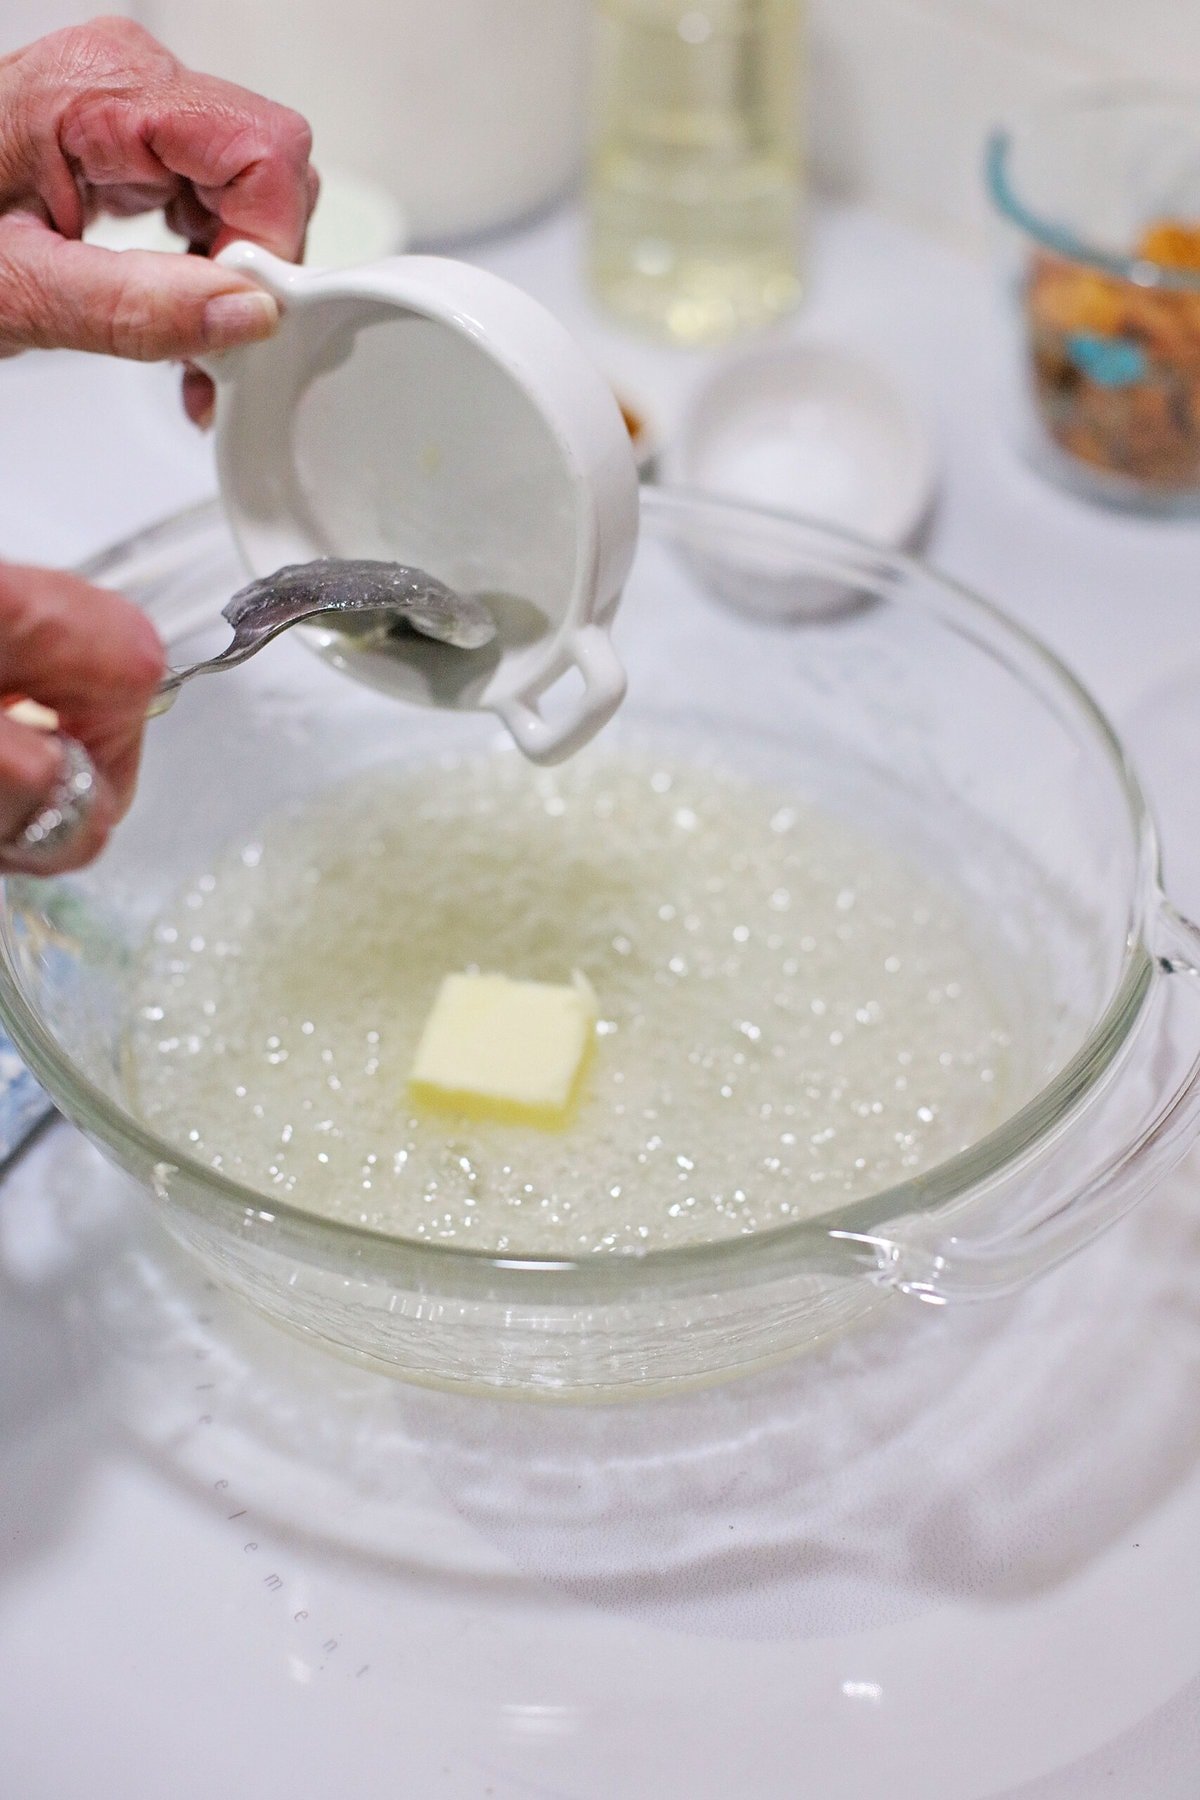 Adding in the butter.